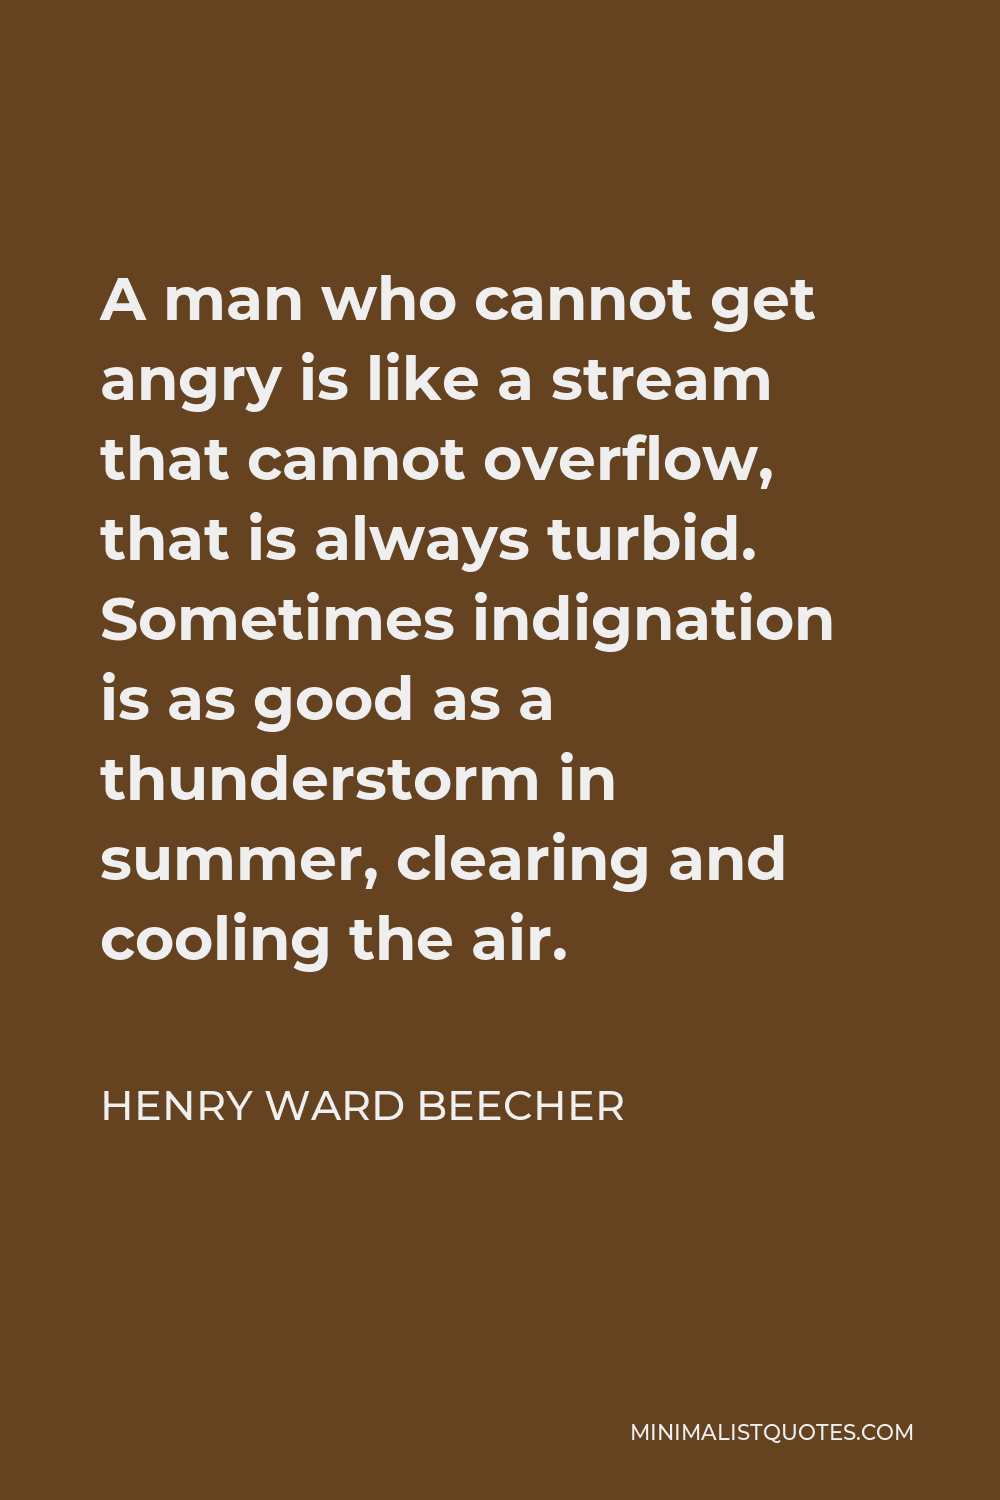 Henry Ward Beecher Quote - A man who cannot get angry is like a stream that cannot overflow, that is always turbid. Sometimes indignation is as good as a thunderstorm in summer, clearing and cooling the air.